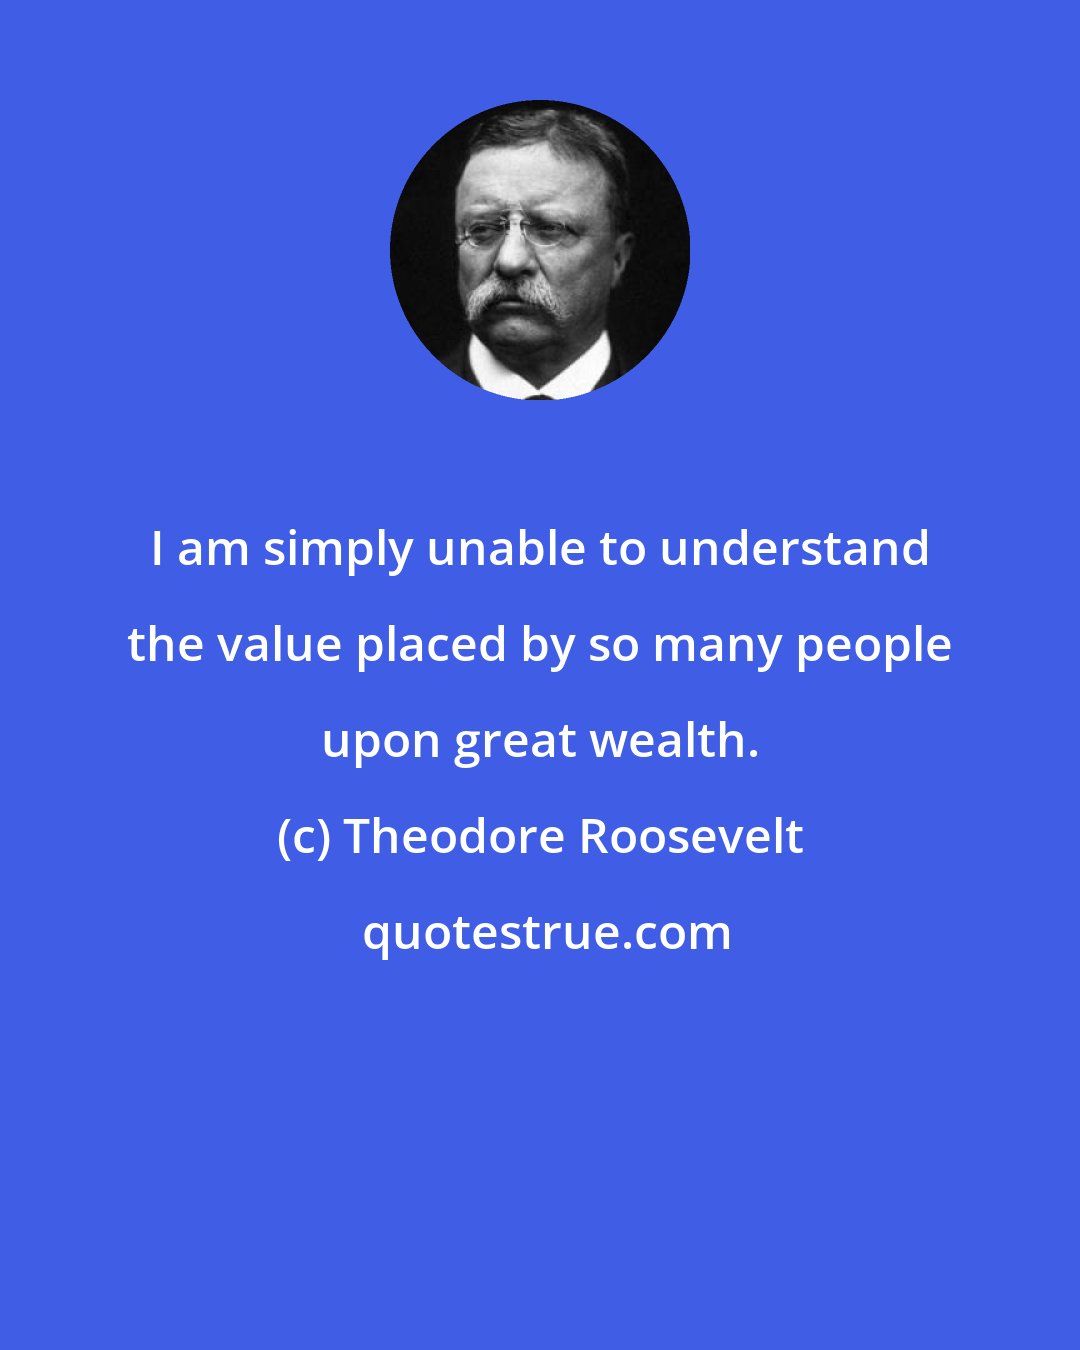 Theodore Roosevelt: I am simply unable to understand the value placed by so many people upon great wealth.